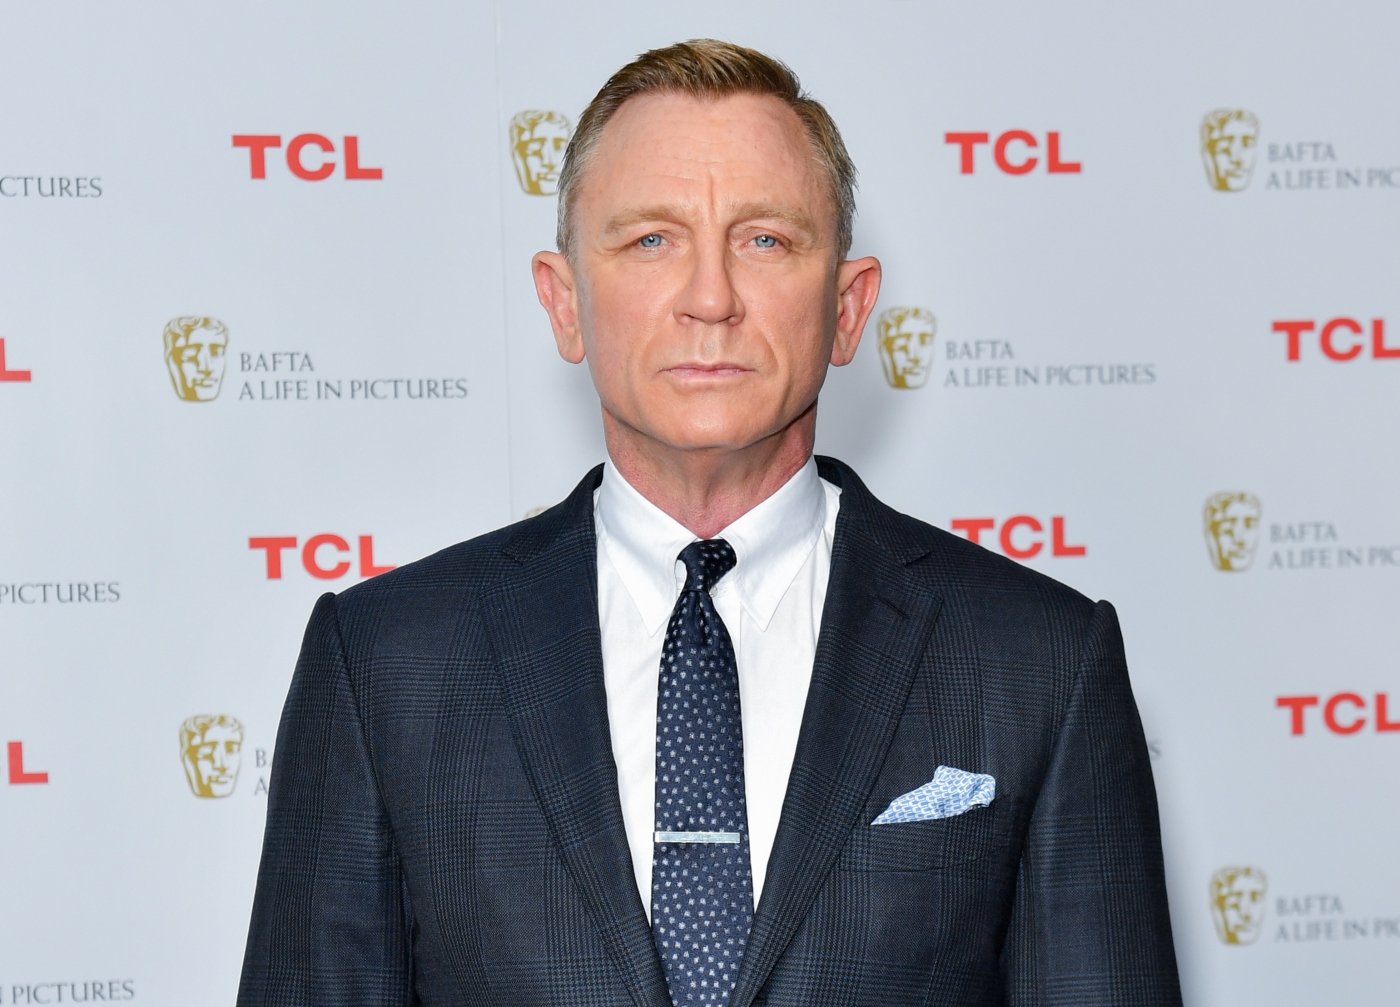 Daniel Craig at 'BAFTA: A Life in Pictures with Daniel Craig' in London